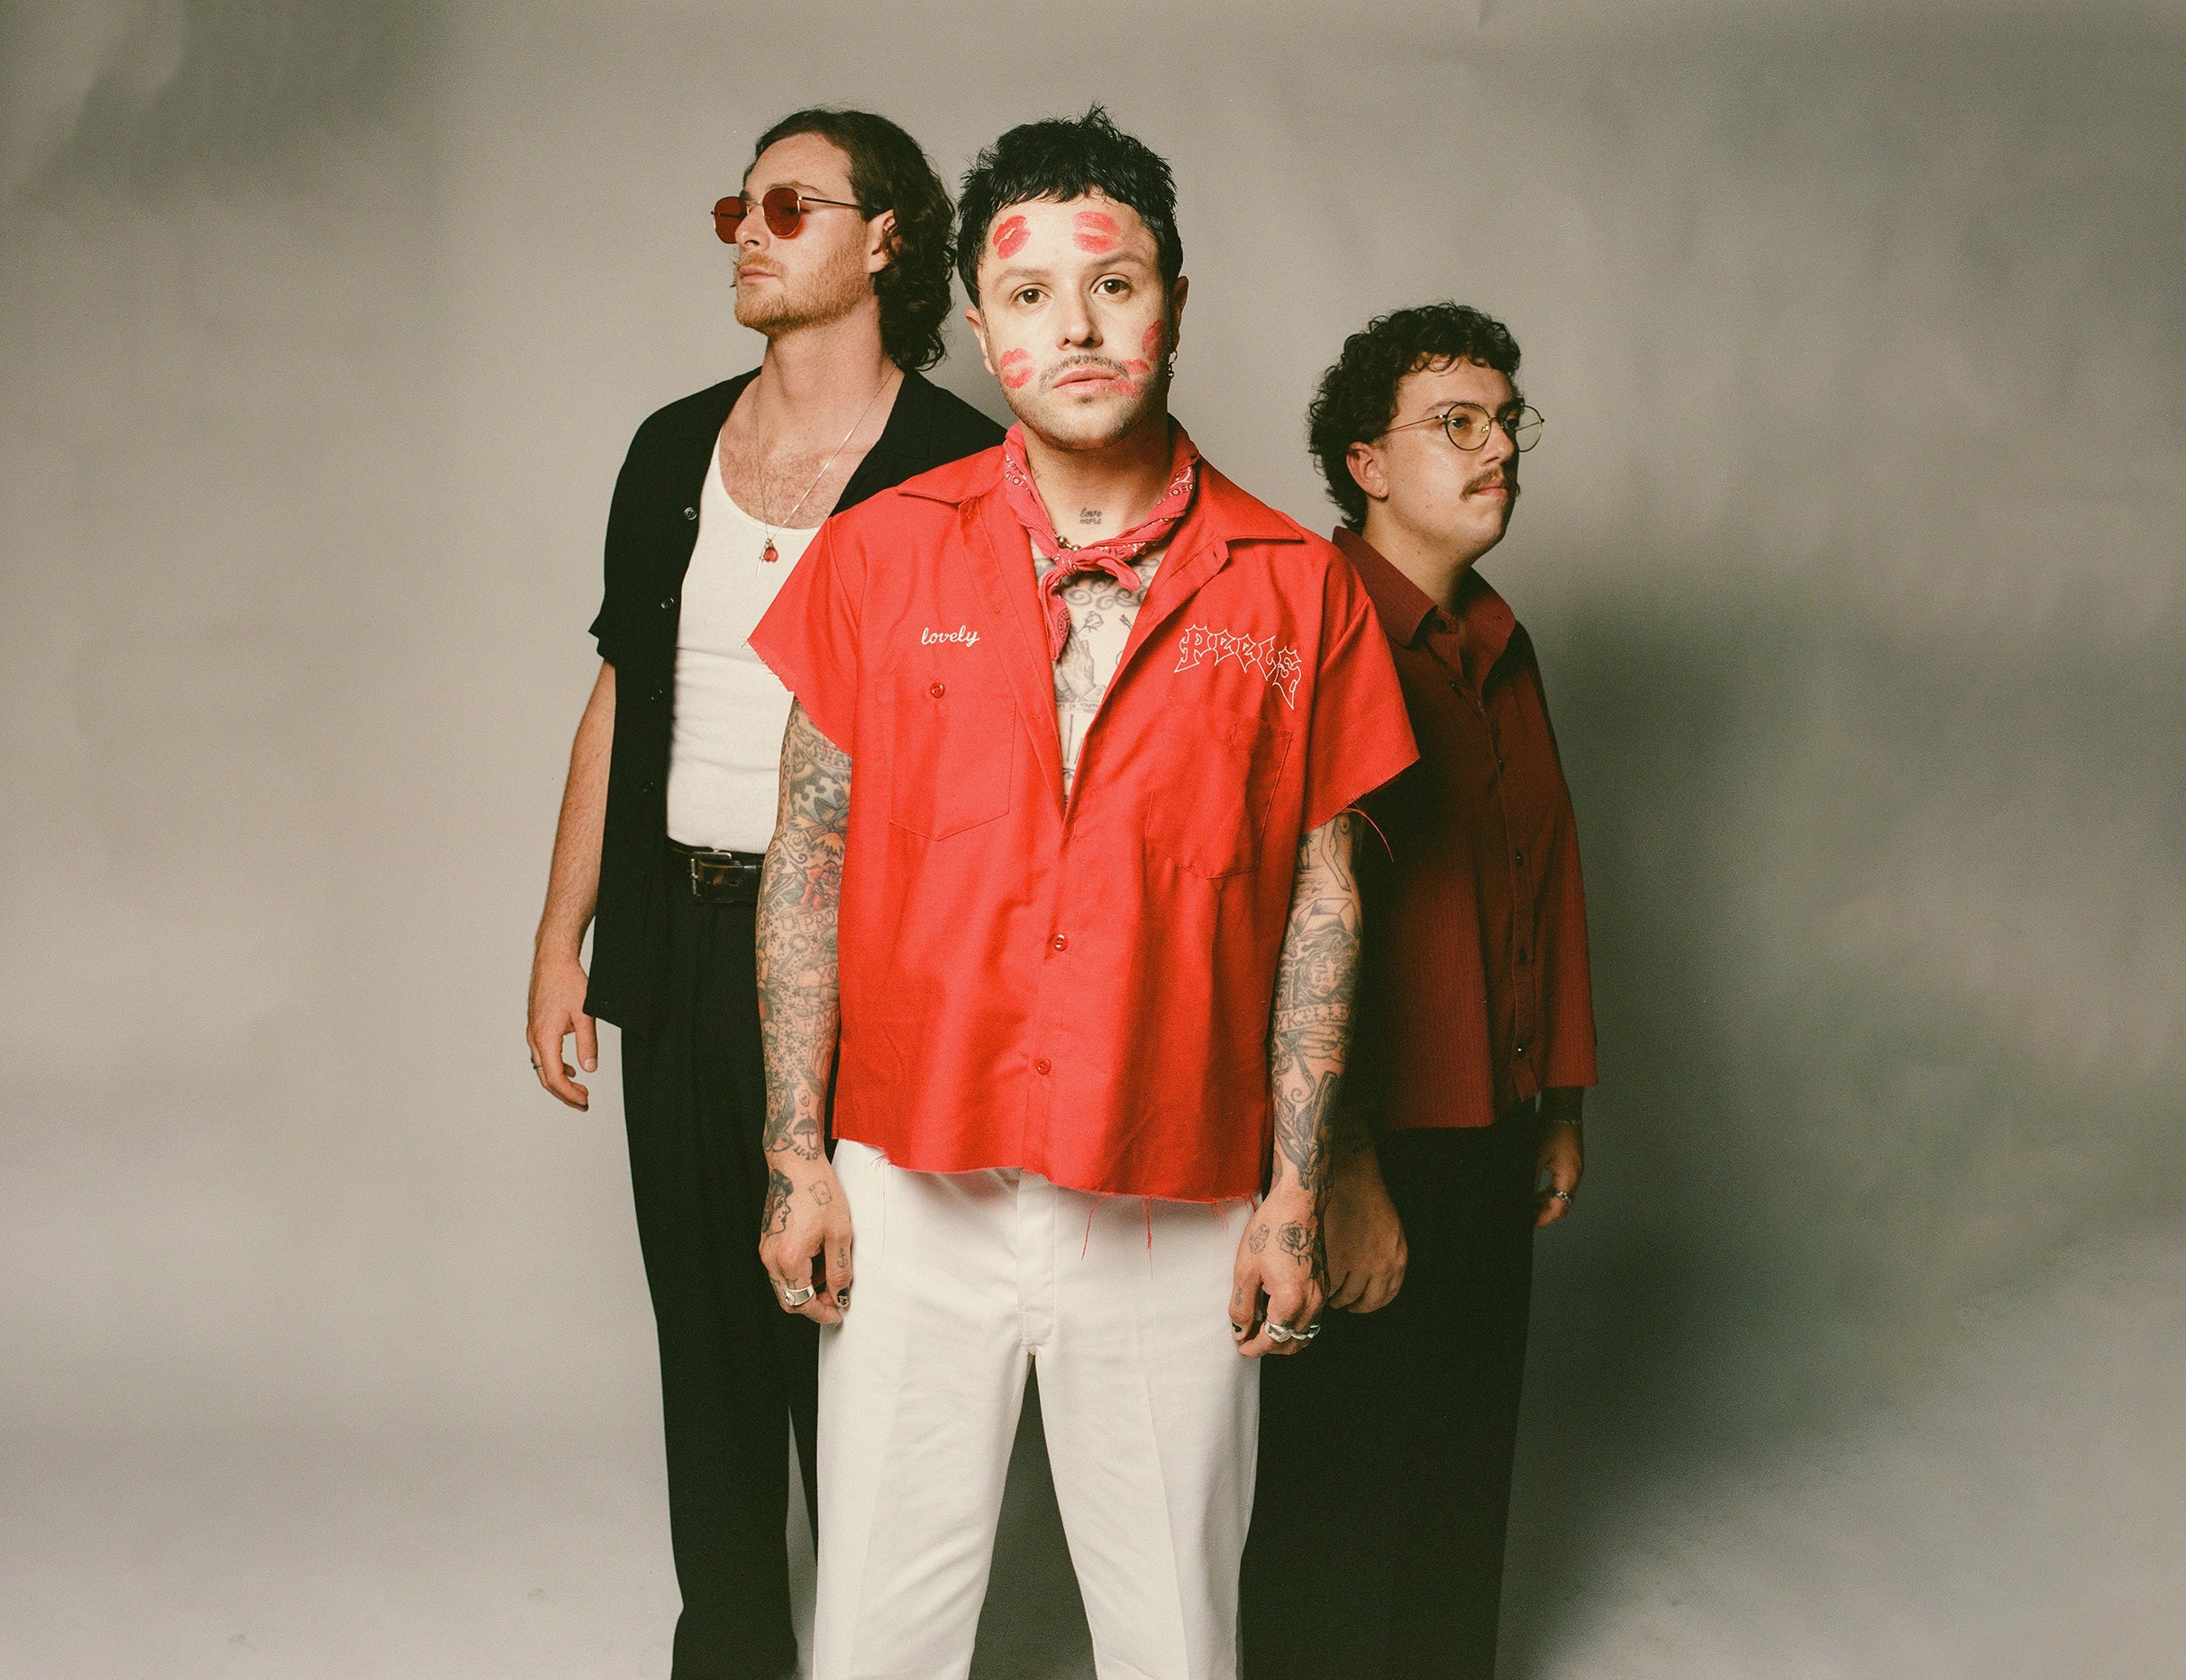 lovelytheband at Brighton Music Hall presented by Citizens